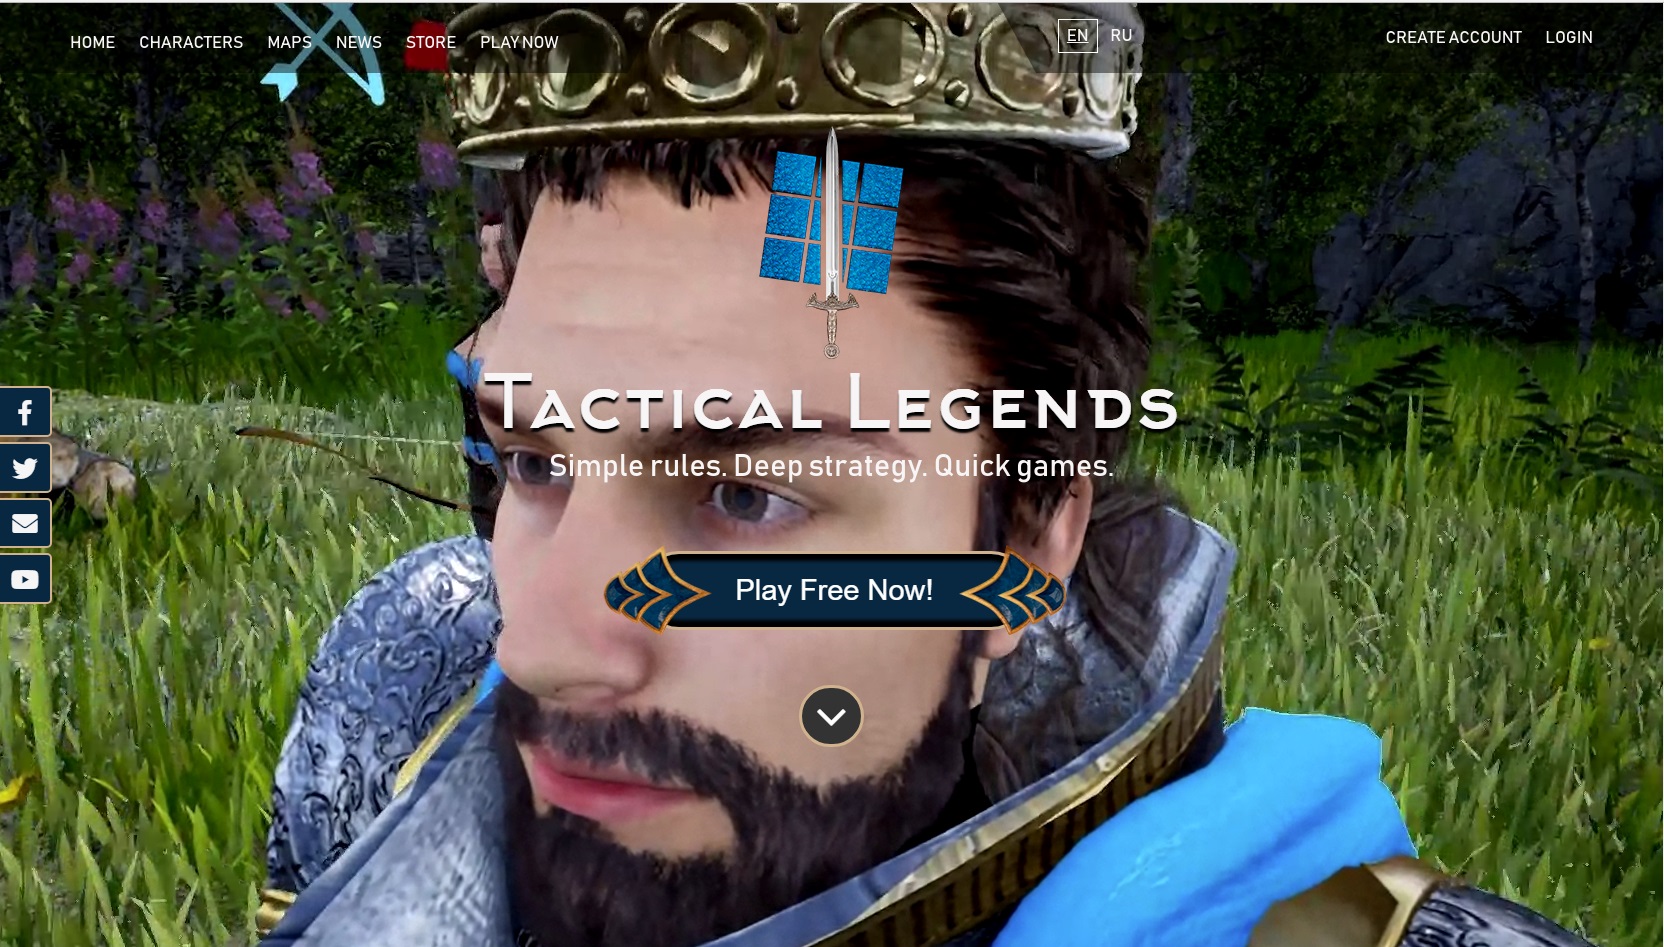 NEW TACTICAL LEGENDS HOMEPAGE